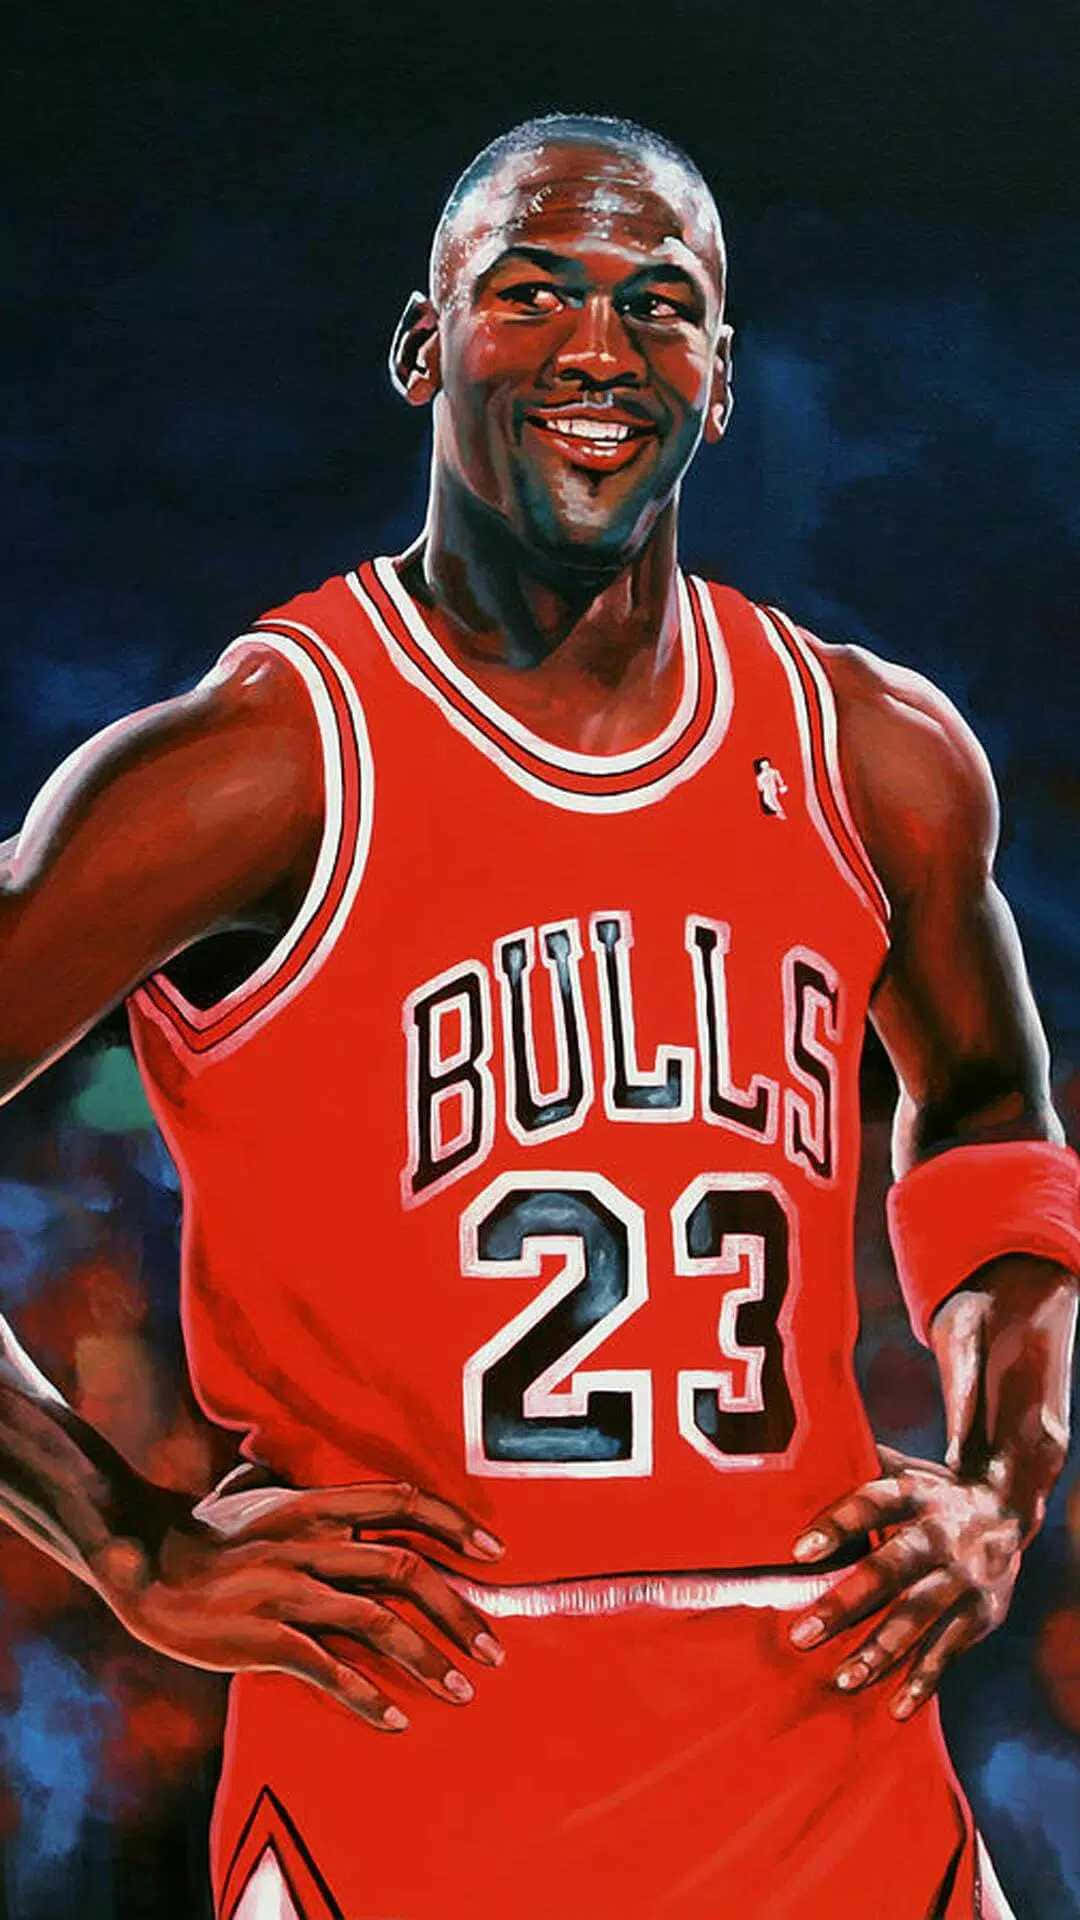 His Airness Michael Jordan - The Best Basketball Player of All Time Wallpaper